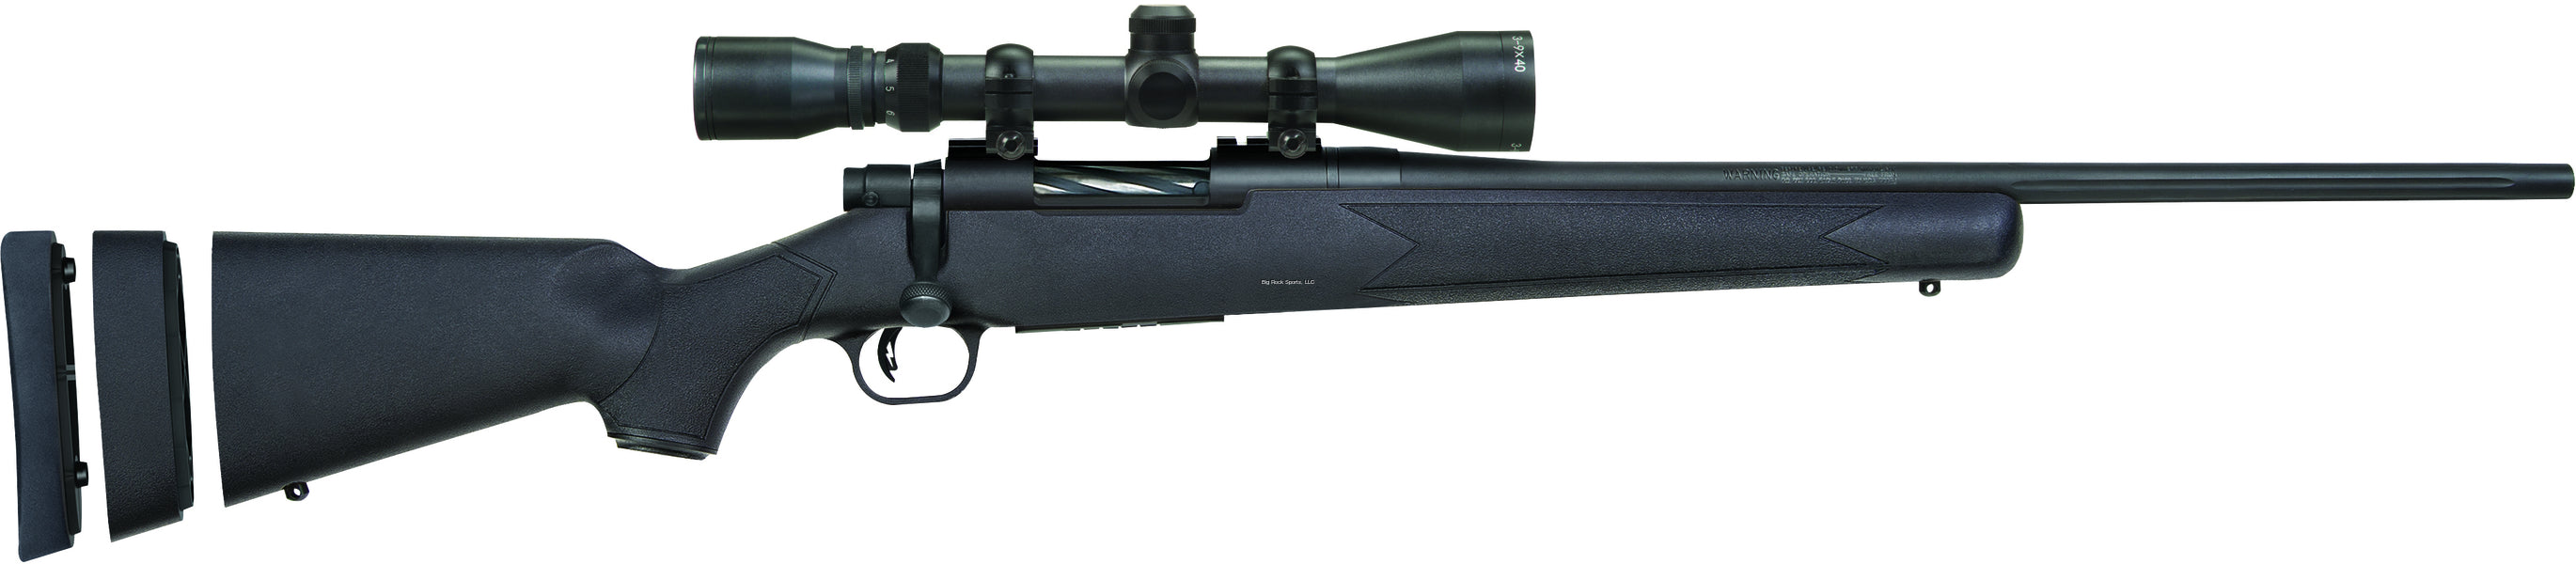 Mossberg 27840 Patriot Youth Bolt Action Rifle 243 WIN